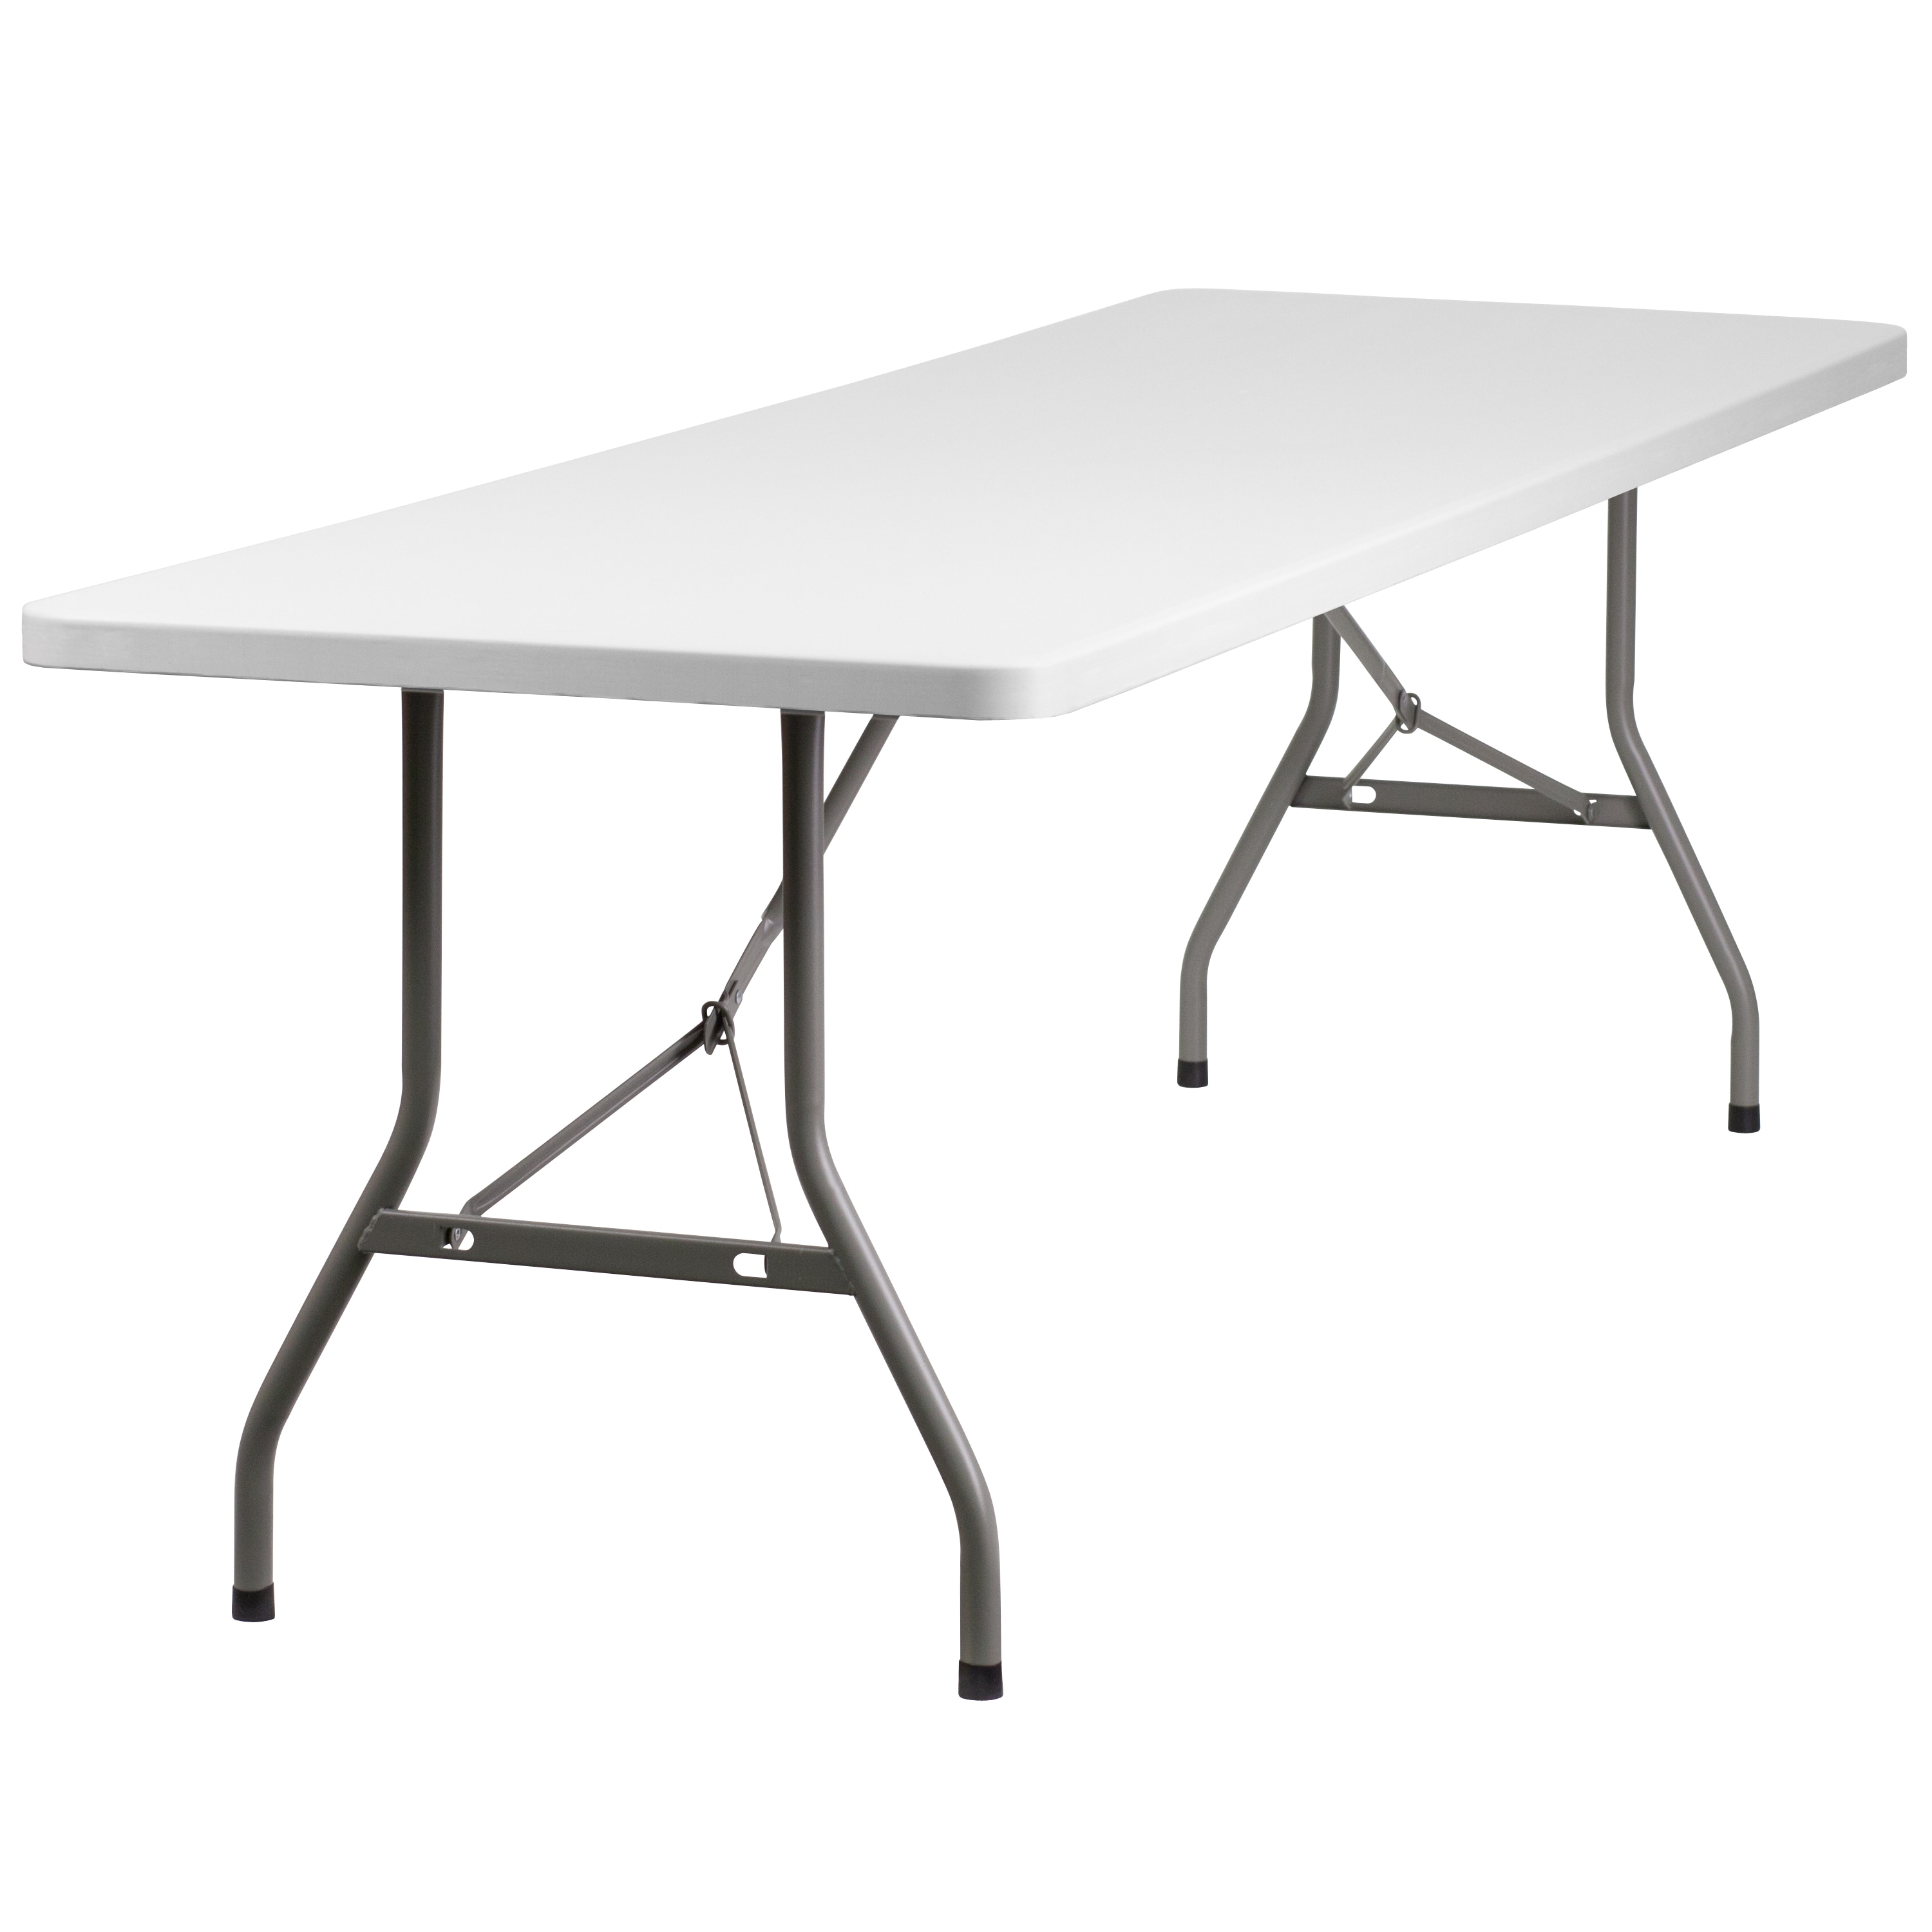 Folding Table 2.6FT Aluminum Rectangle Camping Buffet Wedding Market Garden Party Picnic Trestle Indoor Outdoor Work Top Table Foldaway Carry Handle